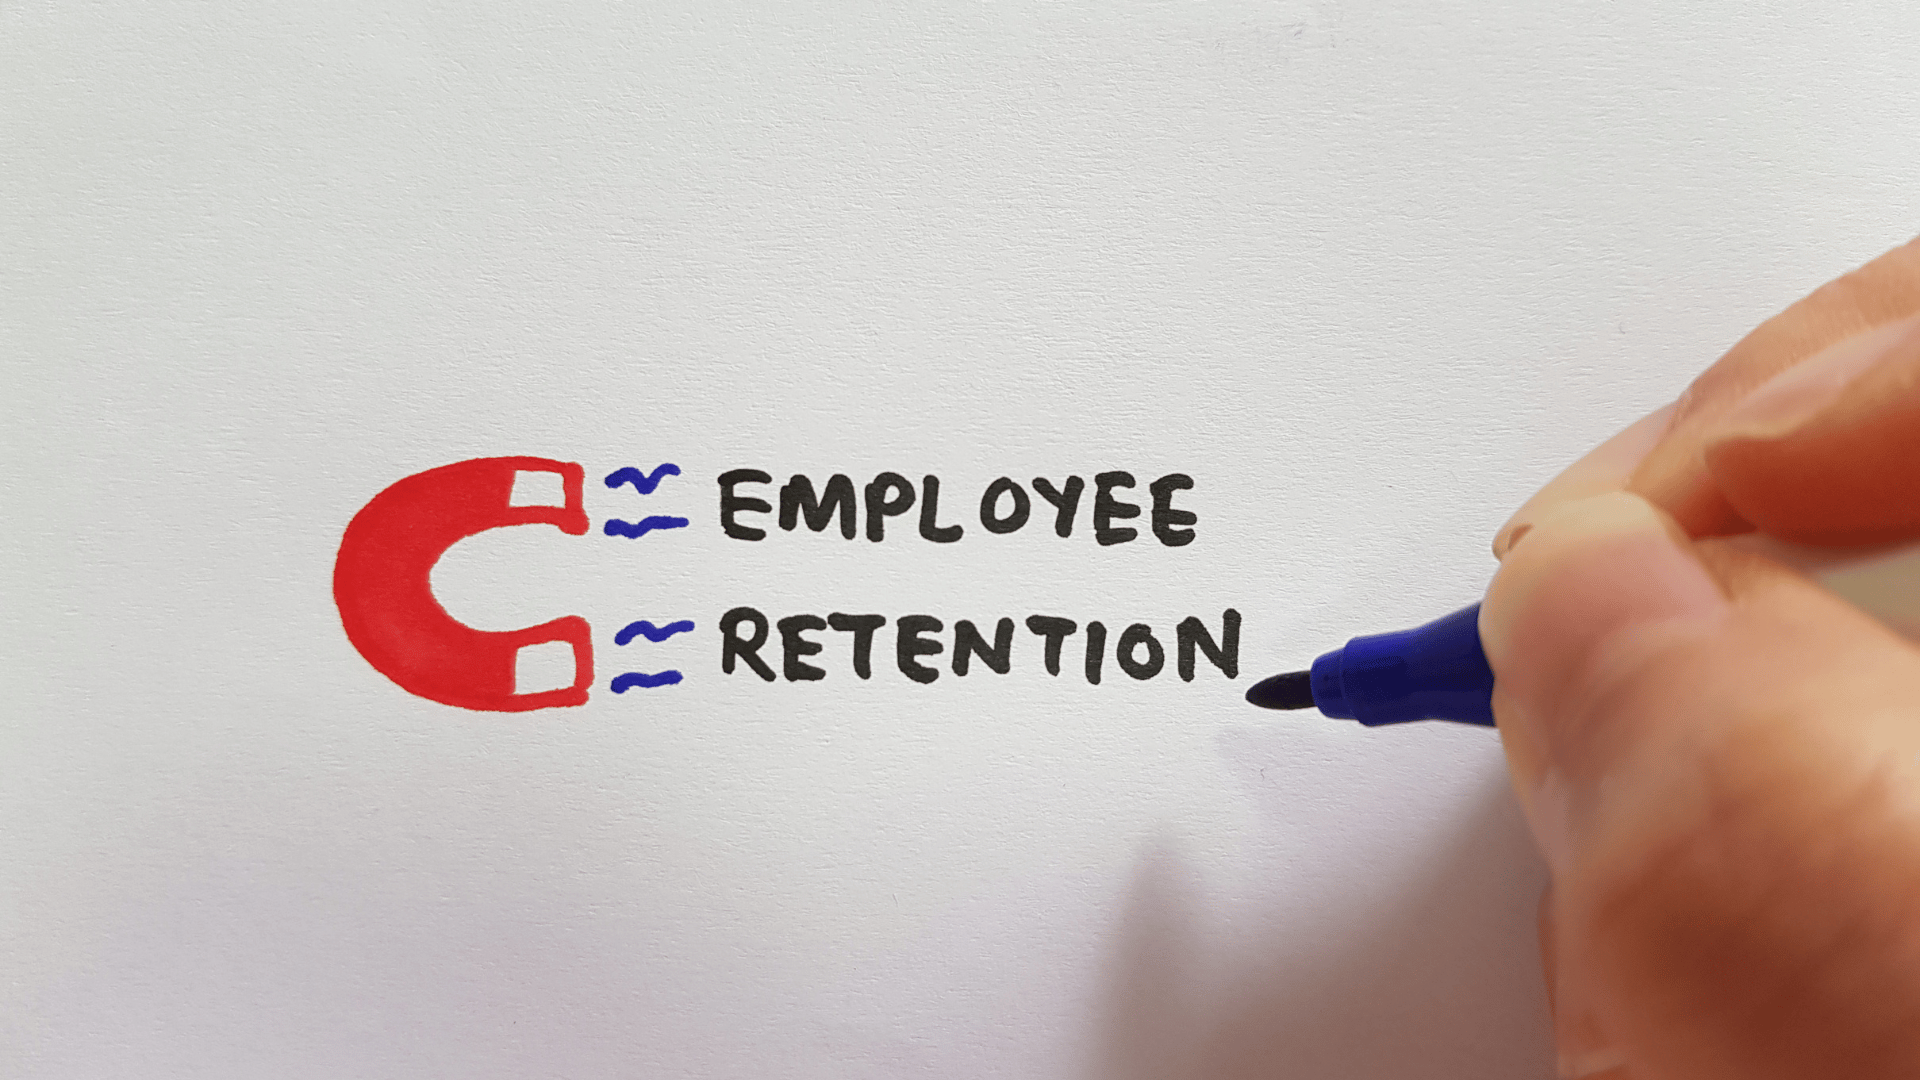 Mind Mapping Predictive Analytics for Employee Retention